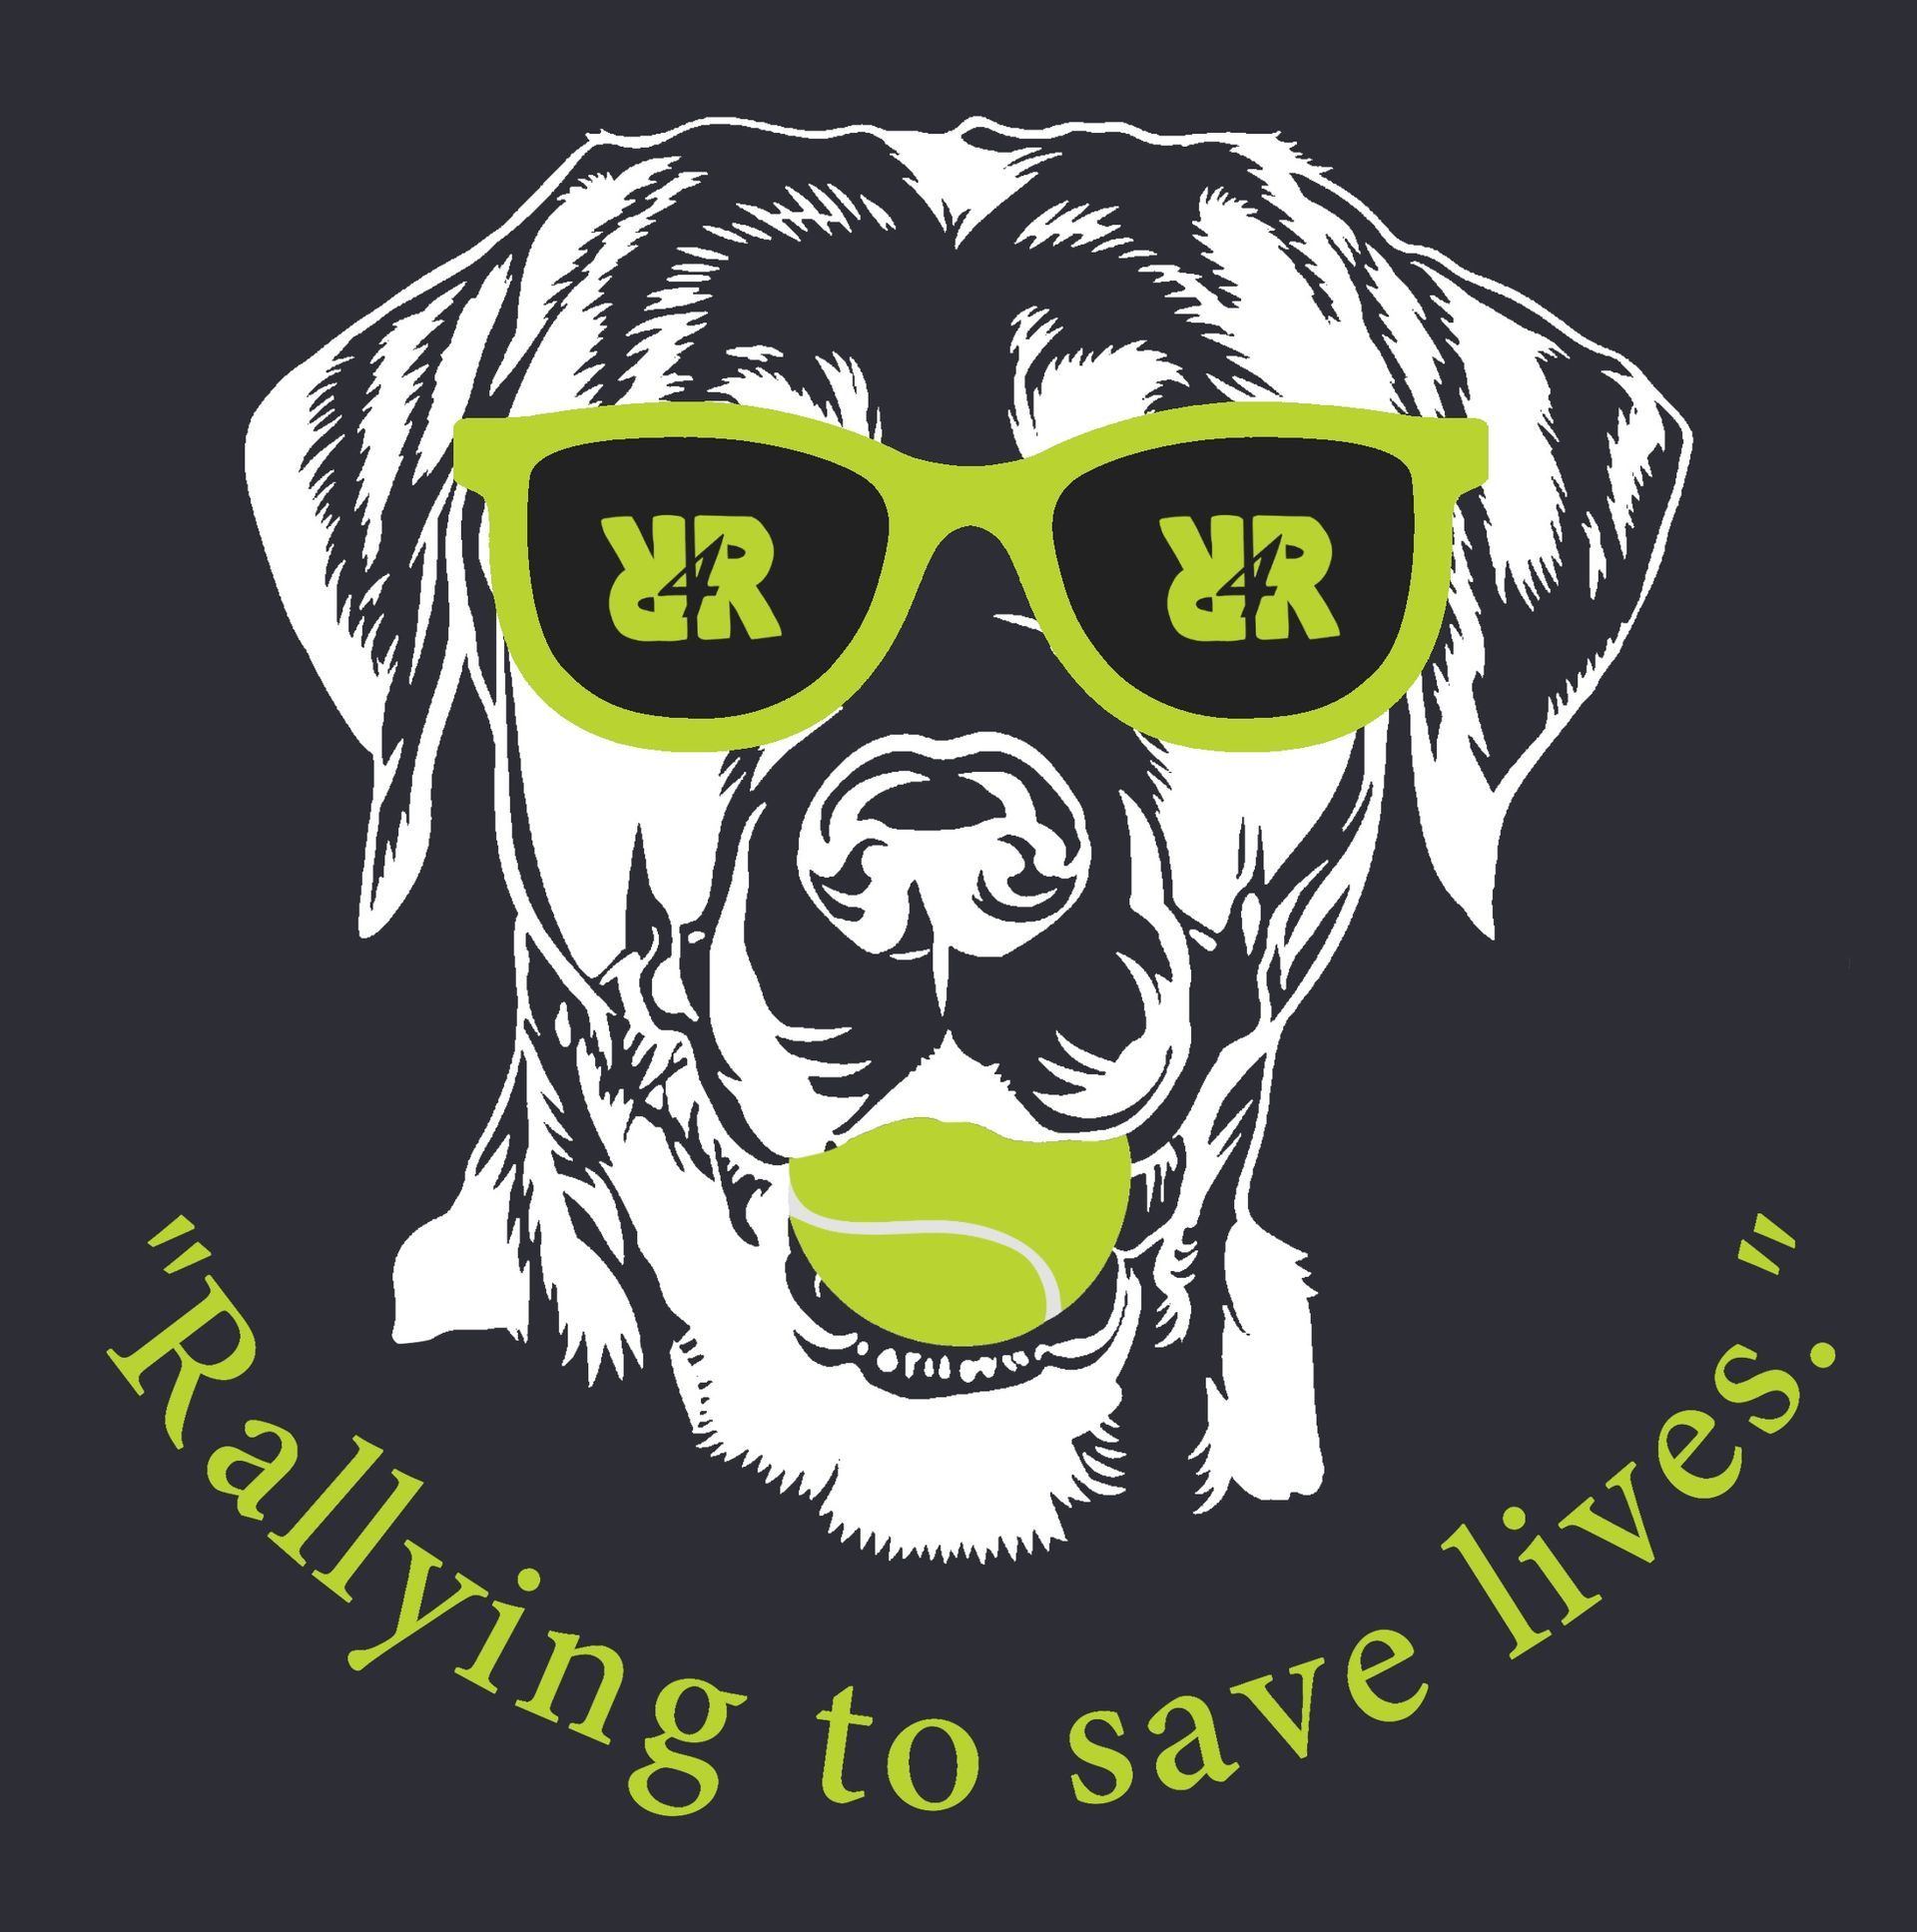 a dog wearing sunglasses has a tennis ball in its mouth and says rallying to save lives